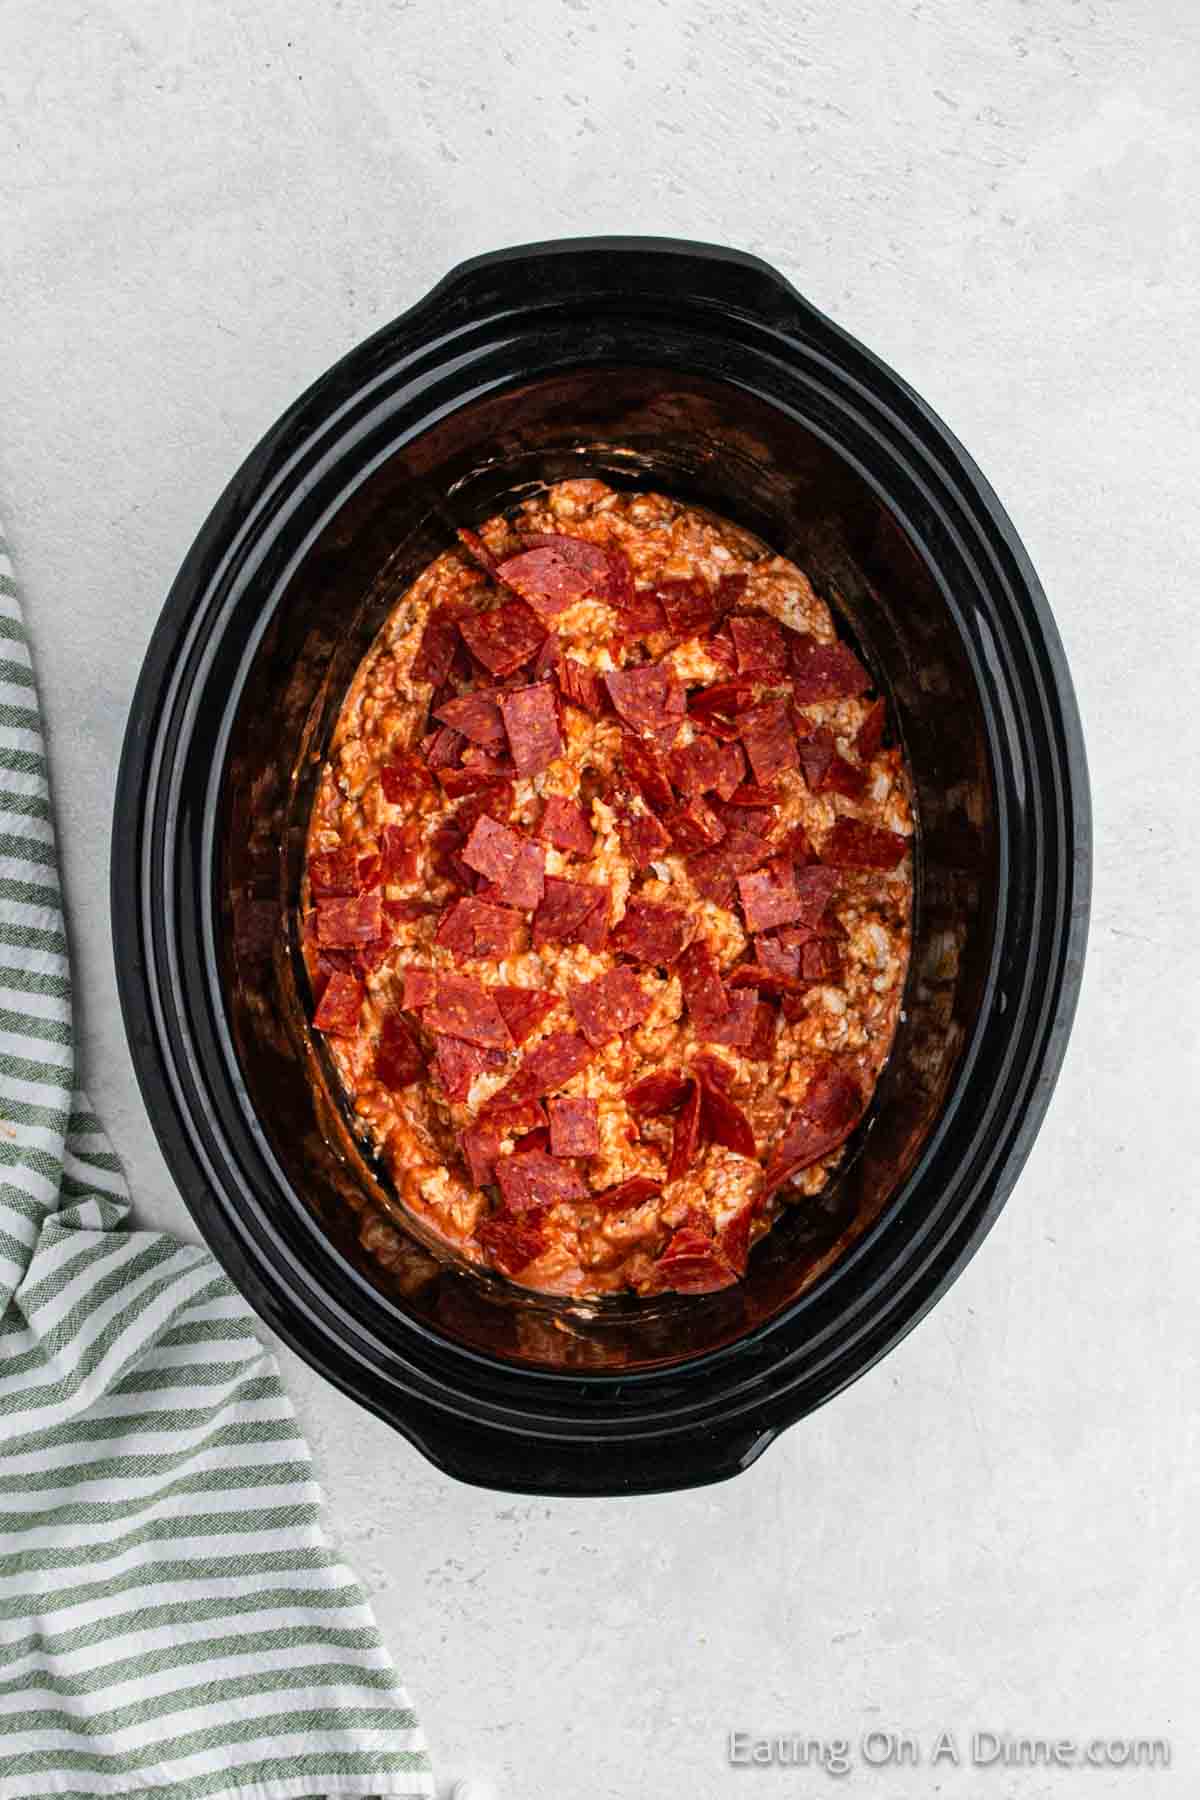 Adding chopped pepperoni to the mixture in the slow cooker